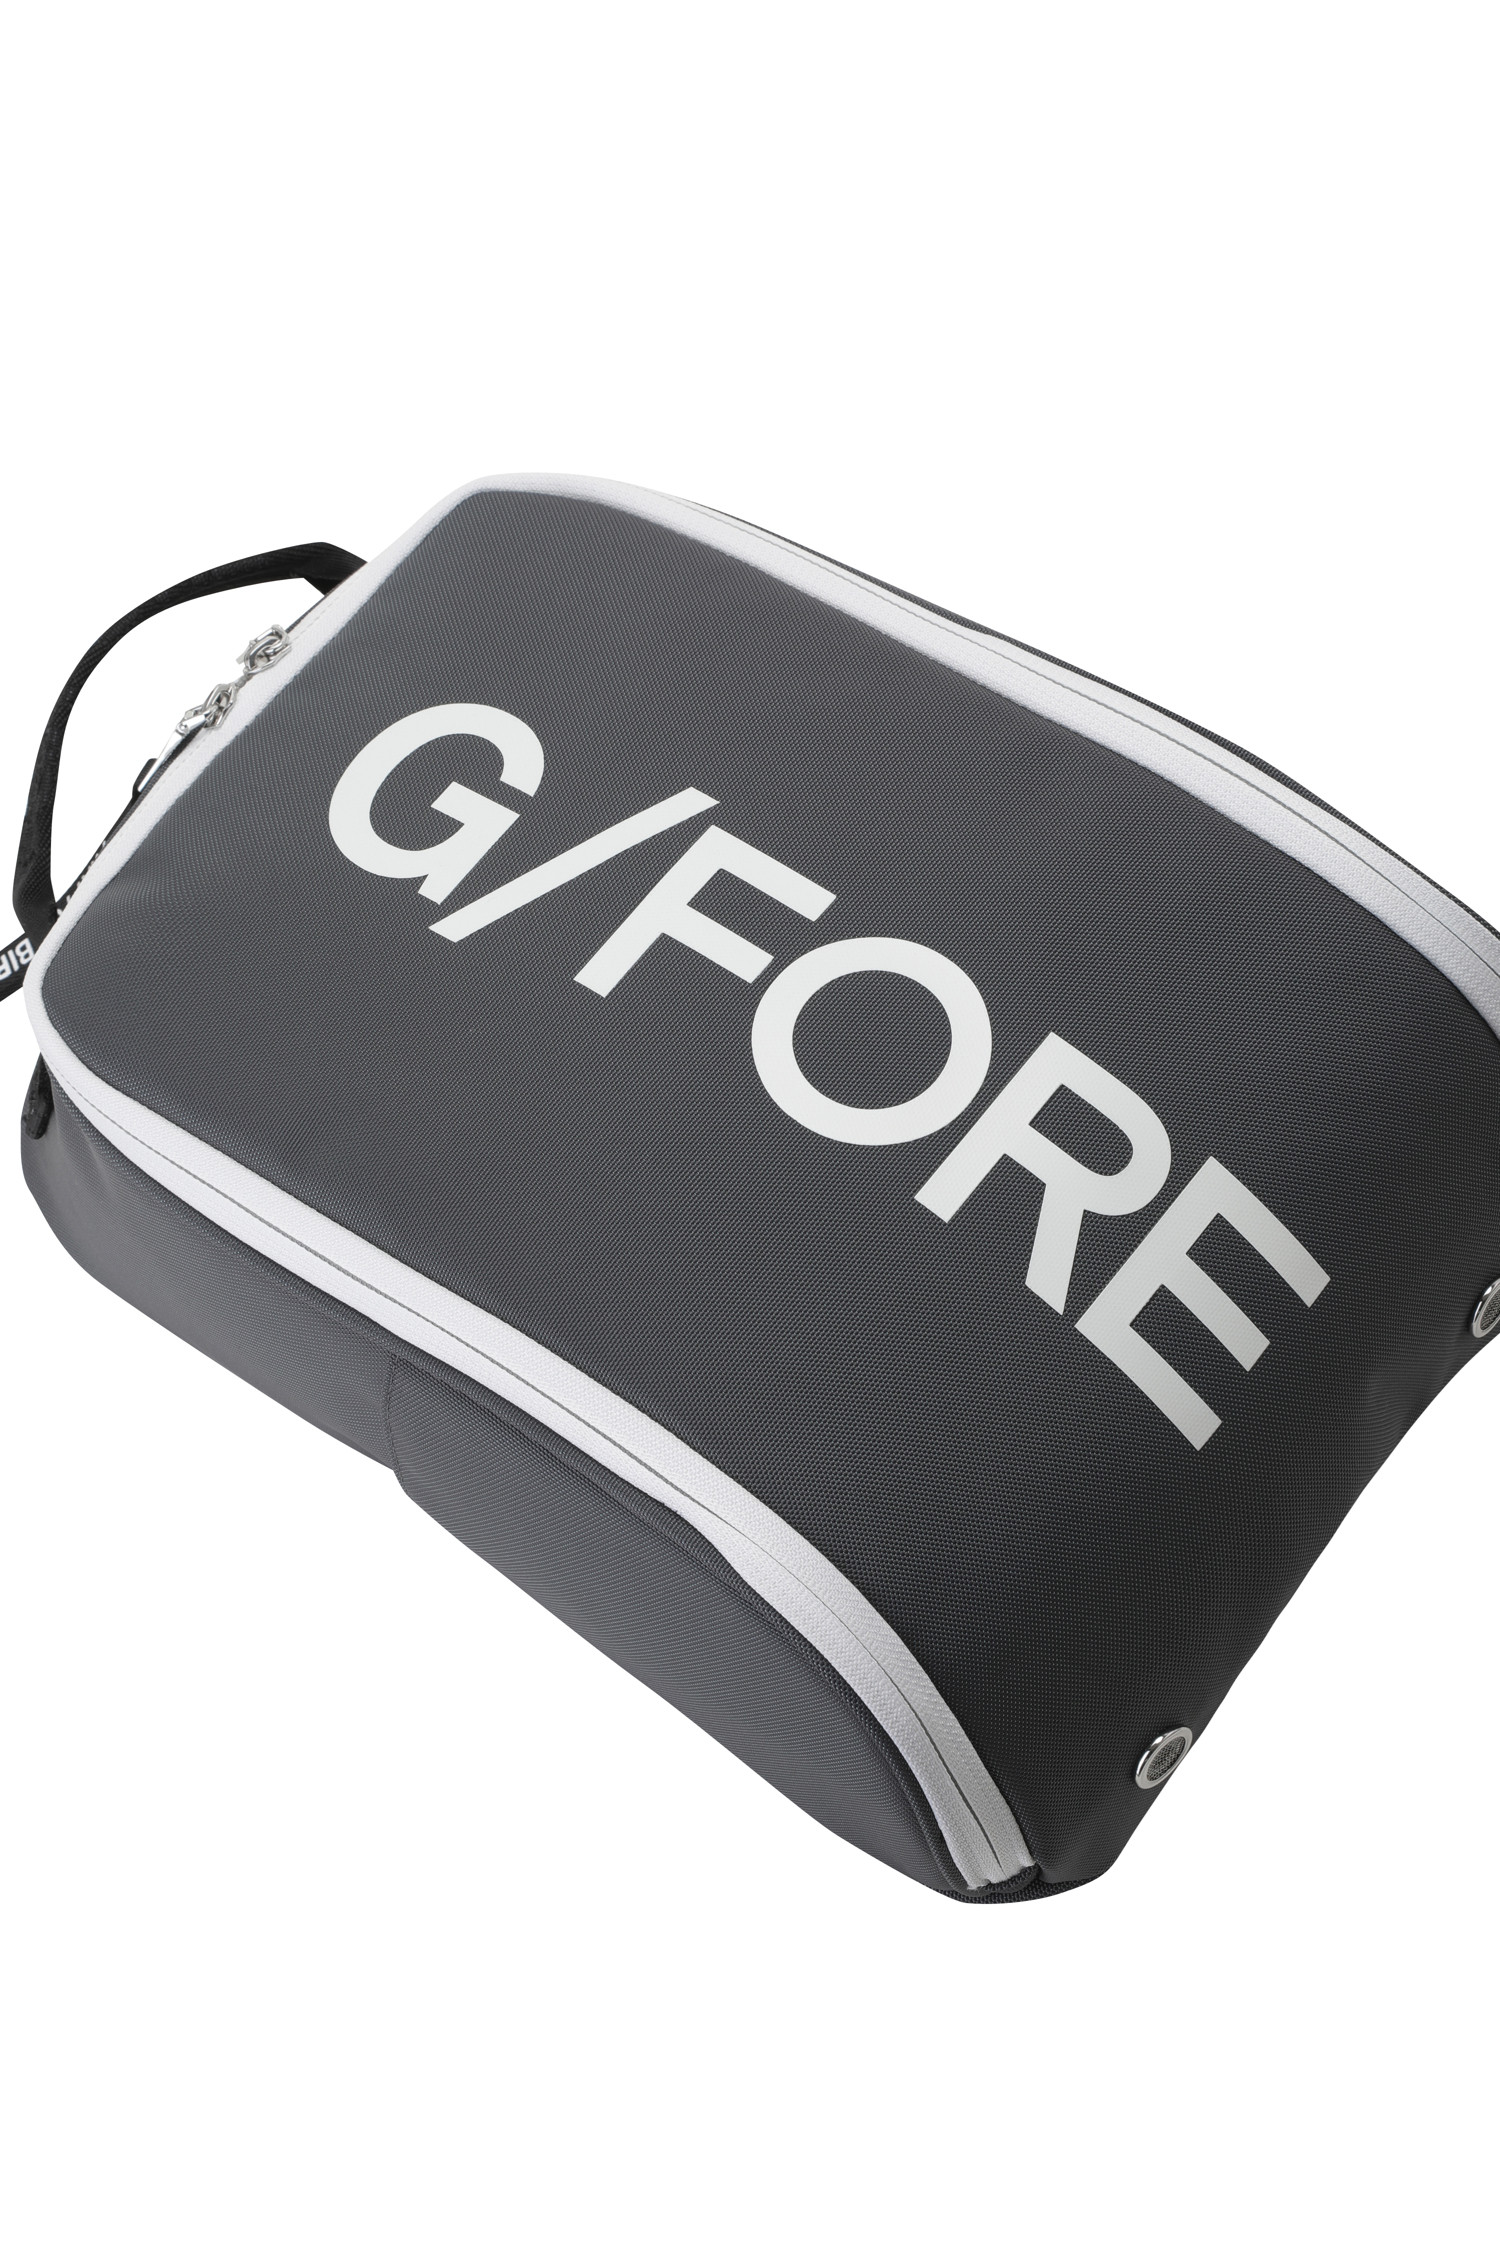 G/FORE SHOES BAG_G/FORE